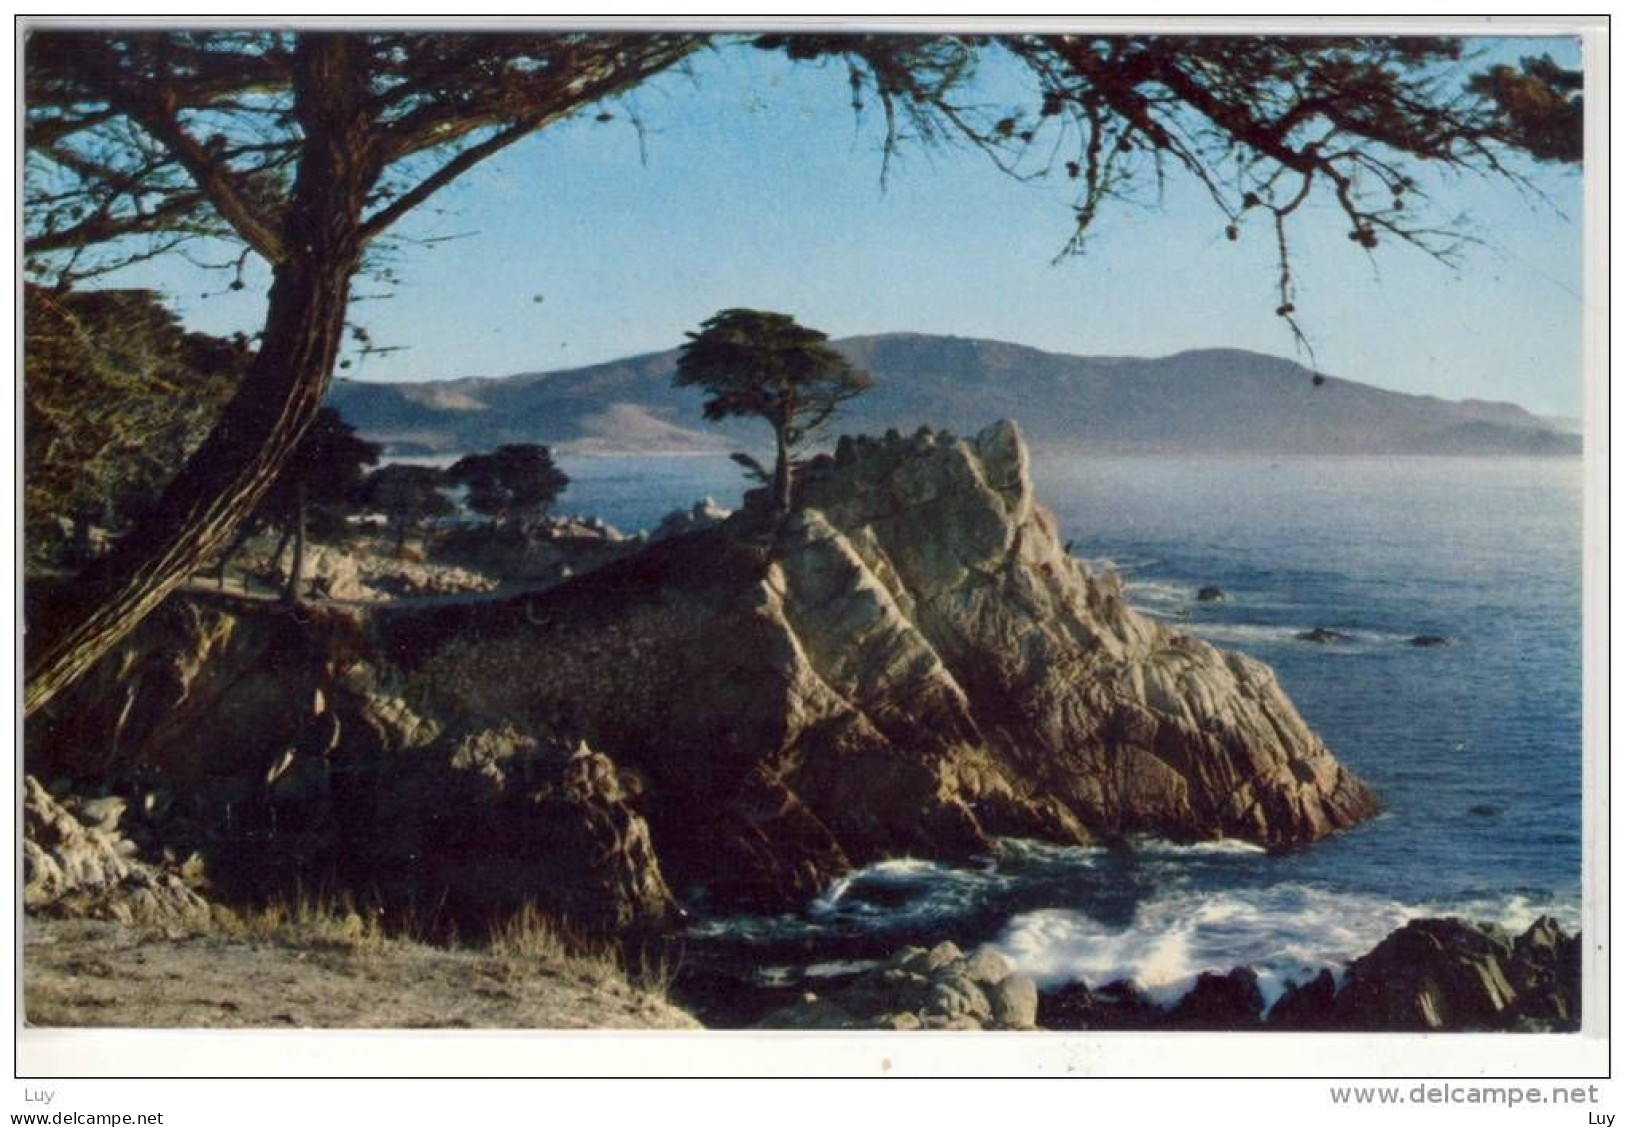 MONTEREY Peninsula, Calif. - Midway Point, 17-mile Drive - American Roadside